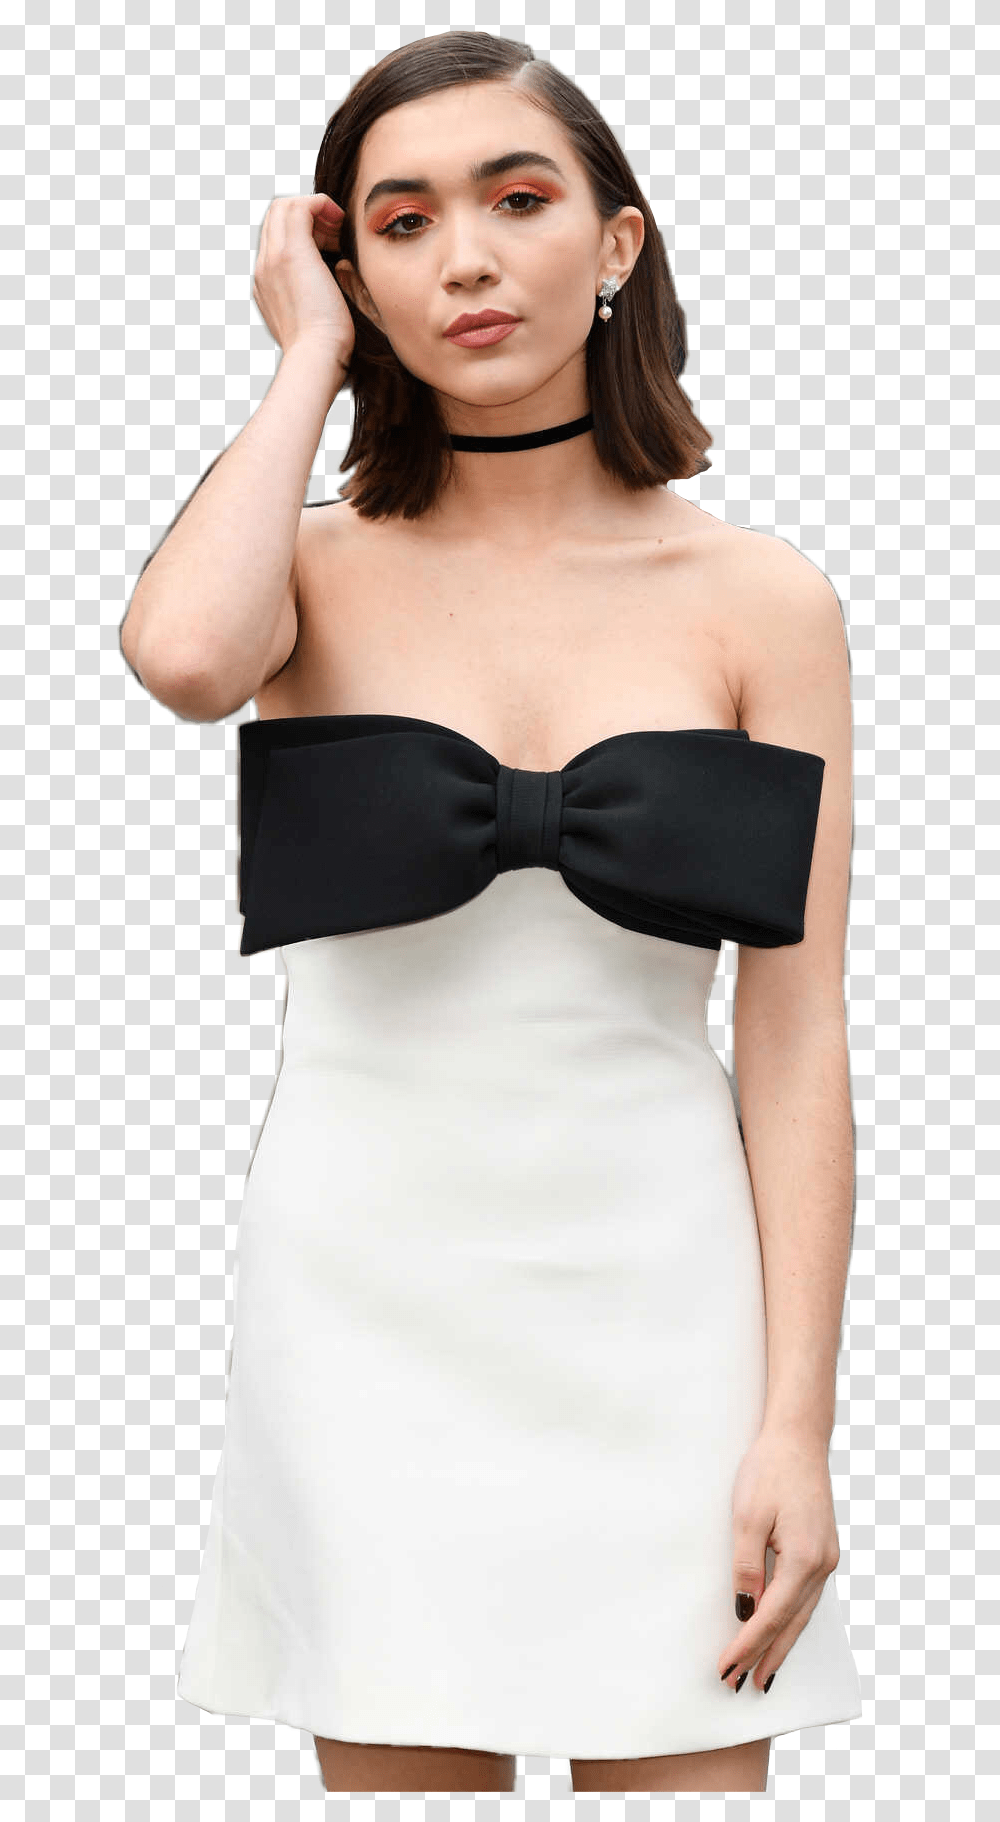 Rowan Blanchard Cocktail Dress, Tie, Accessories, Accessory, Person Transparent Png